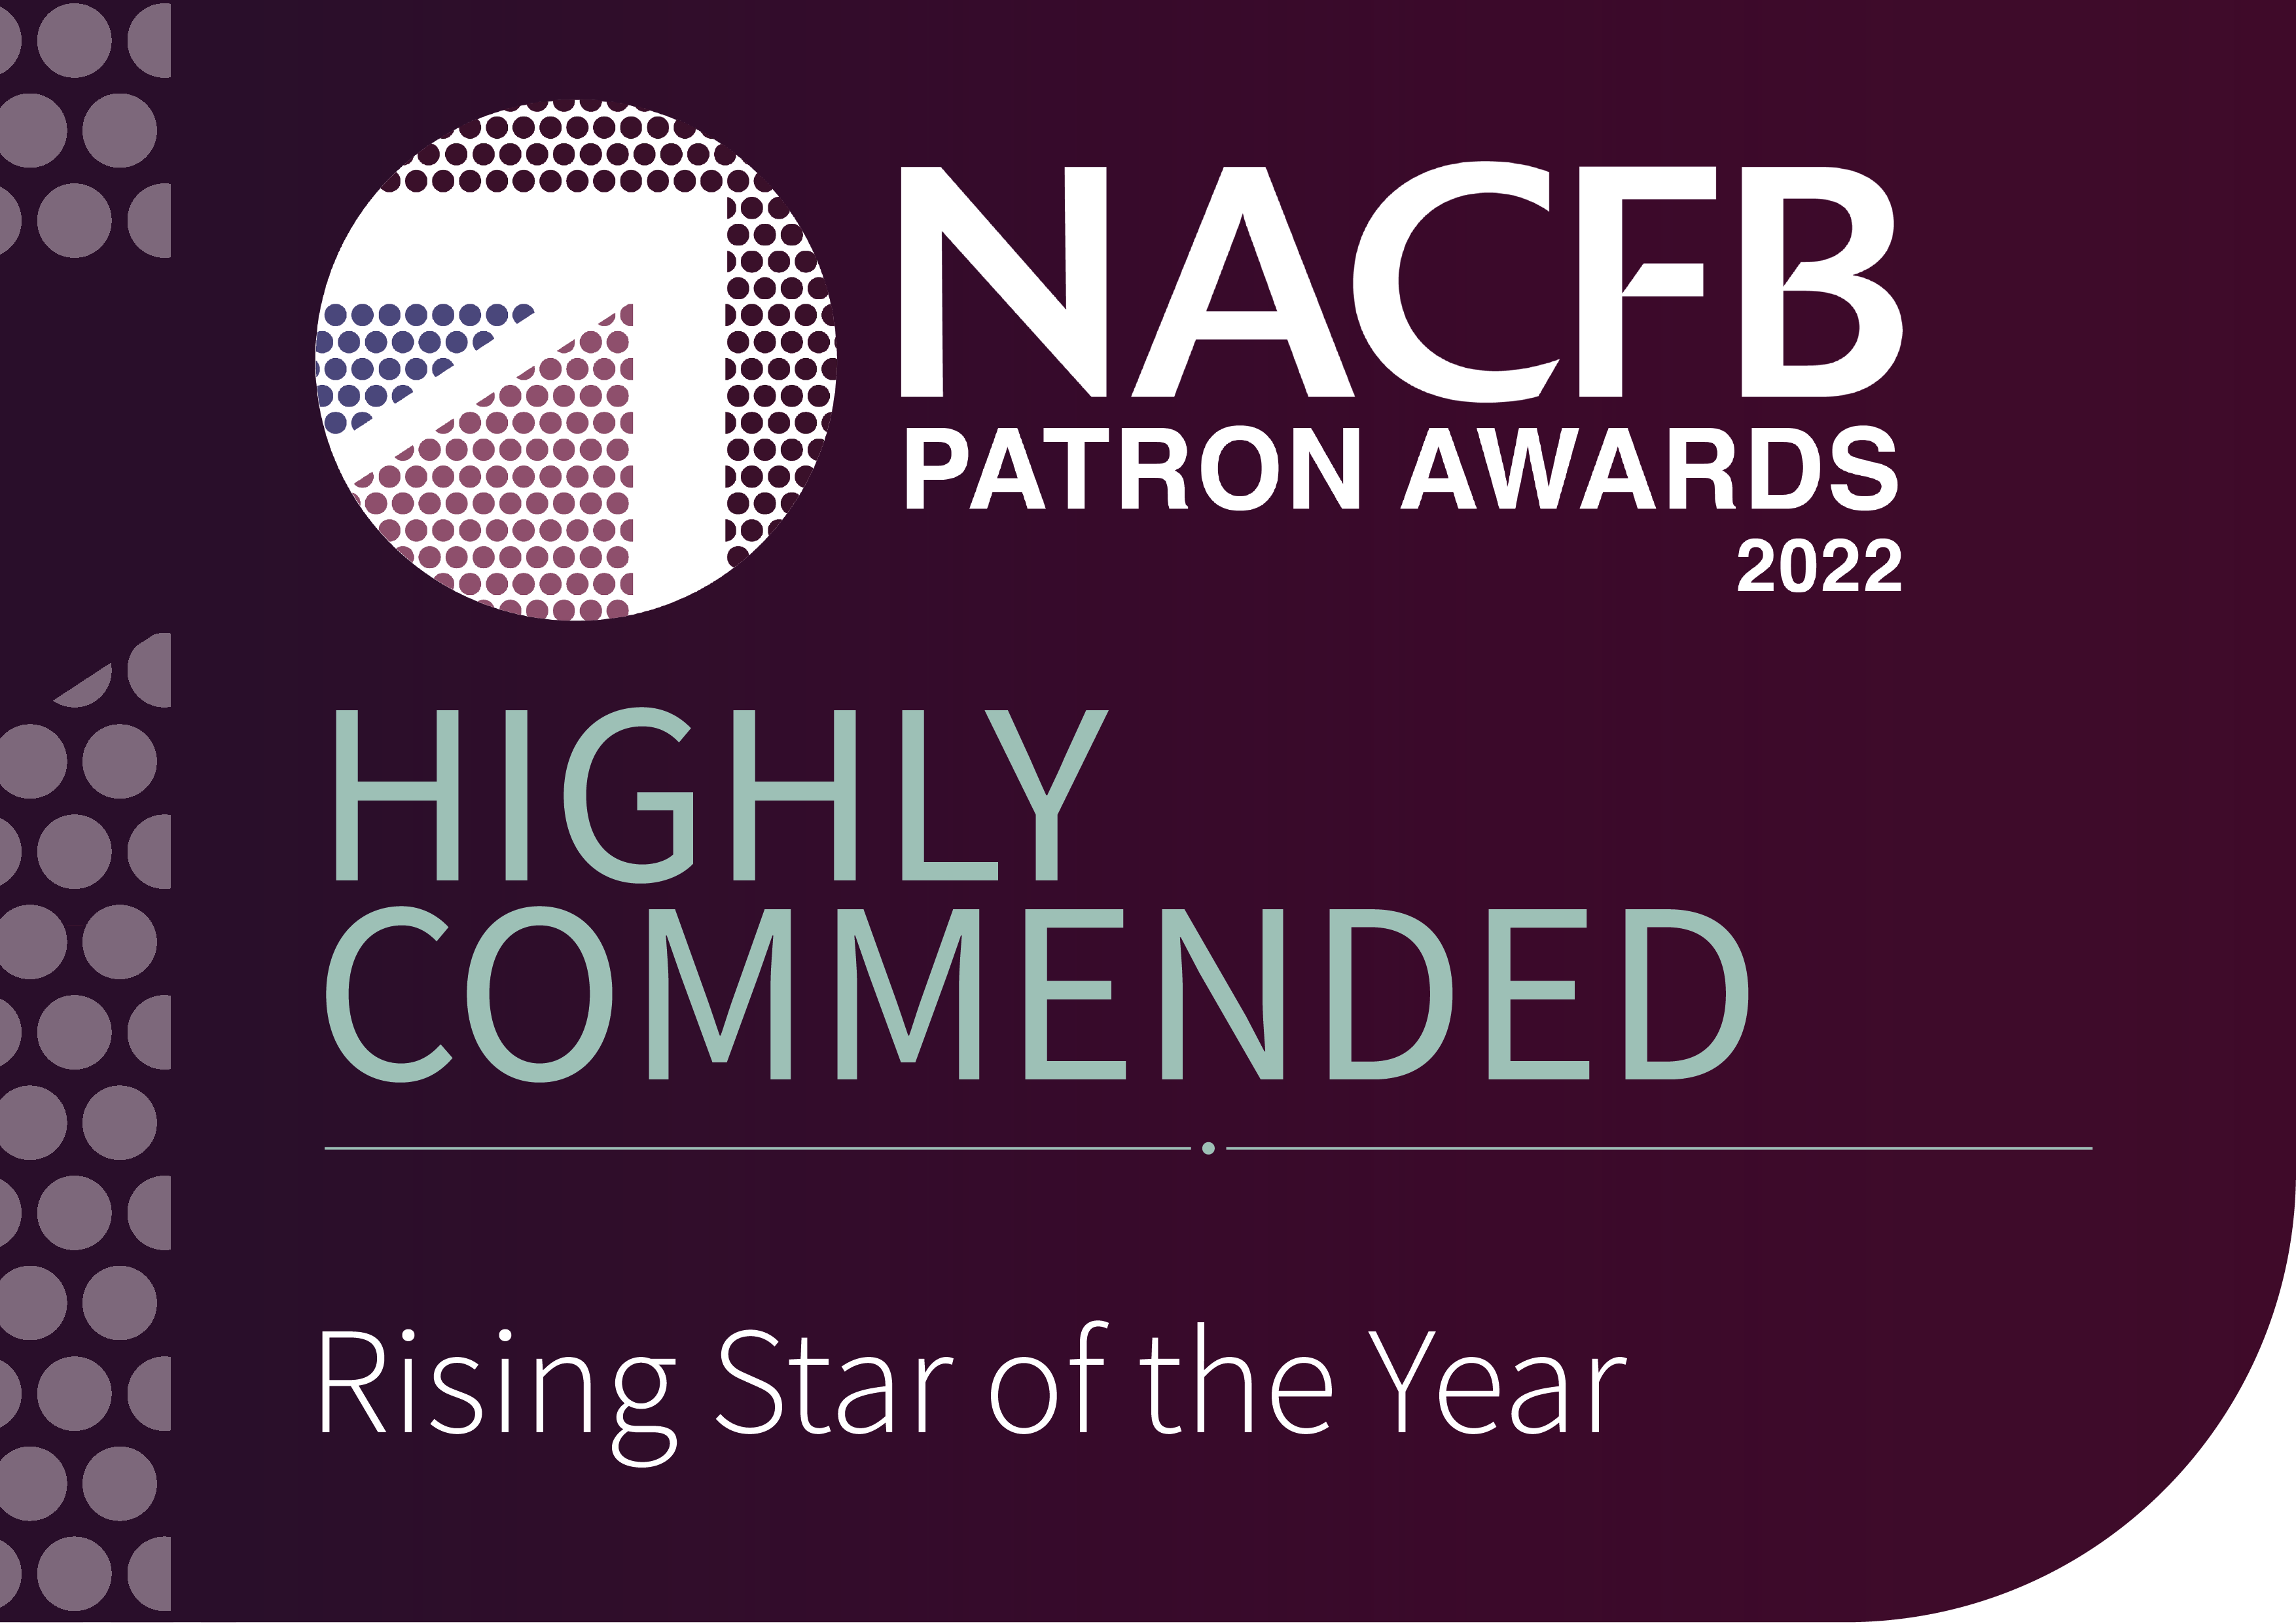 Patron Awards Highly Commended Rising Star of the Year